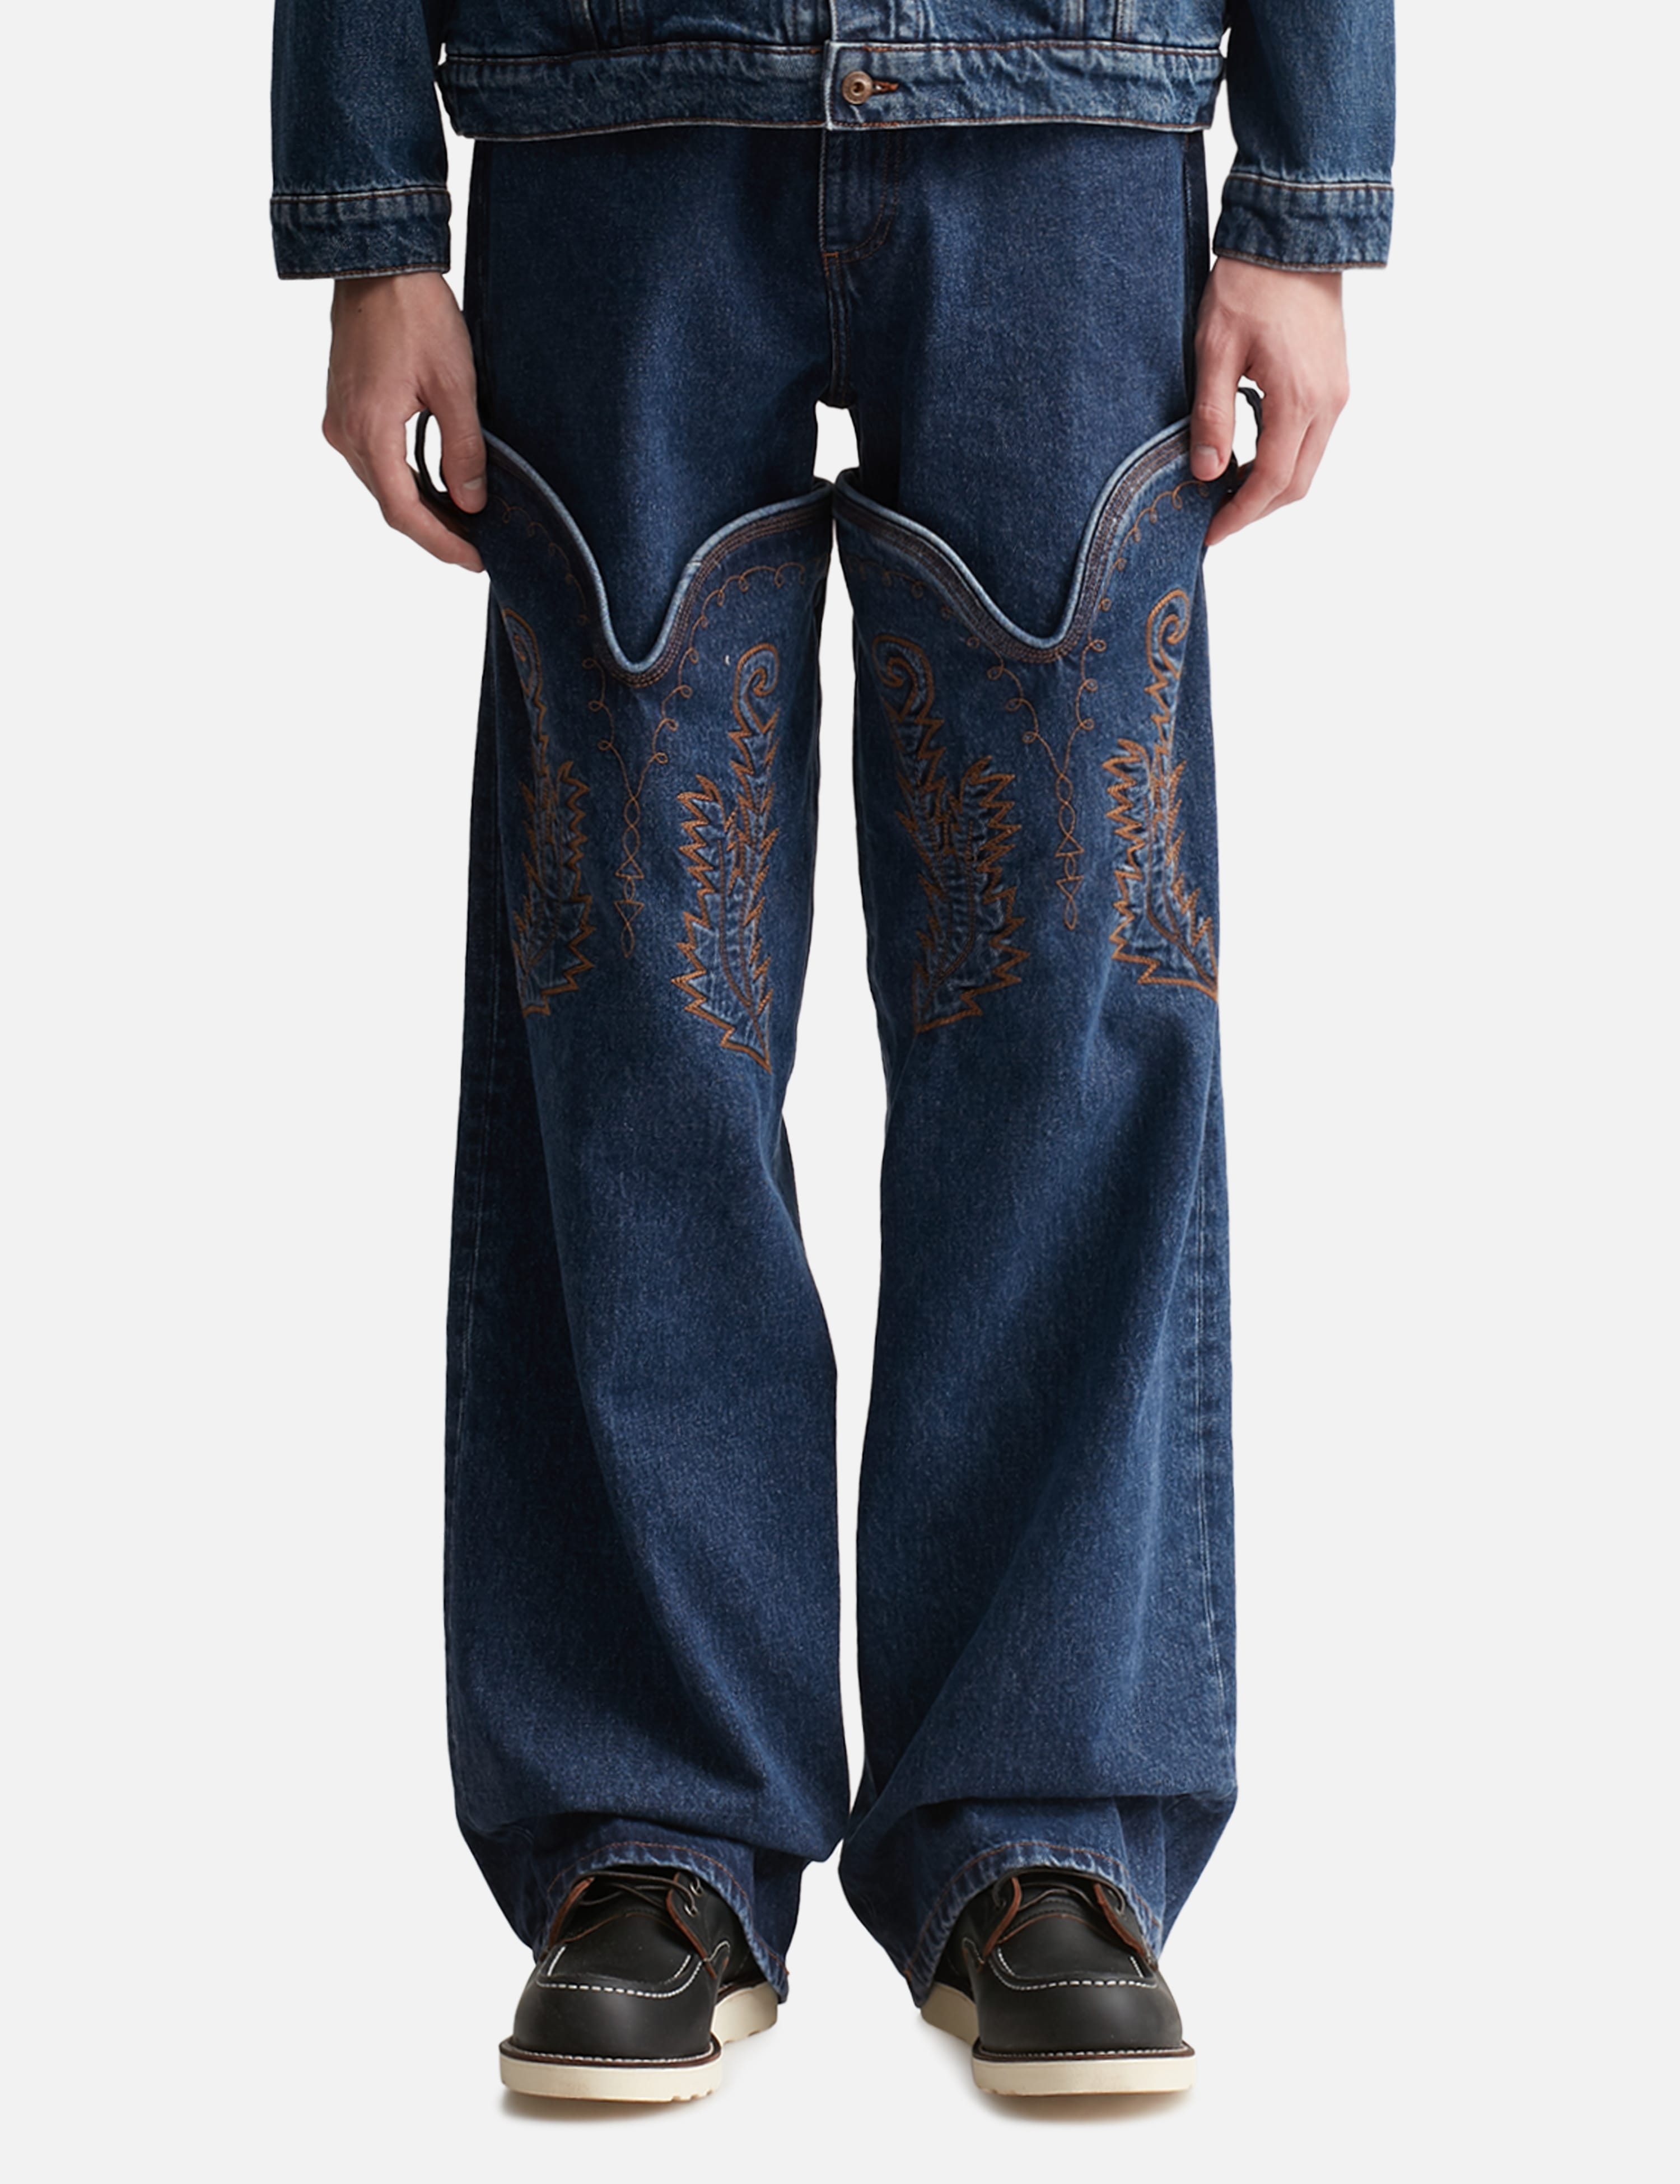 Y/PROJECT - CLASSIC MAXI COWBOY CUFF JEANS | HBX - HYPEBEAST 為您 